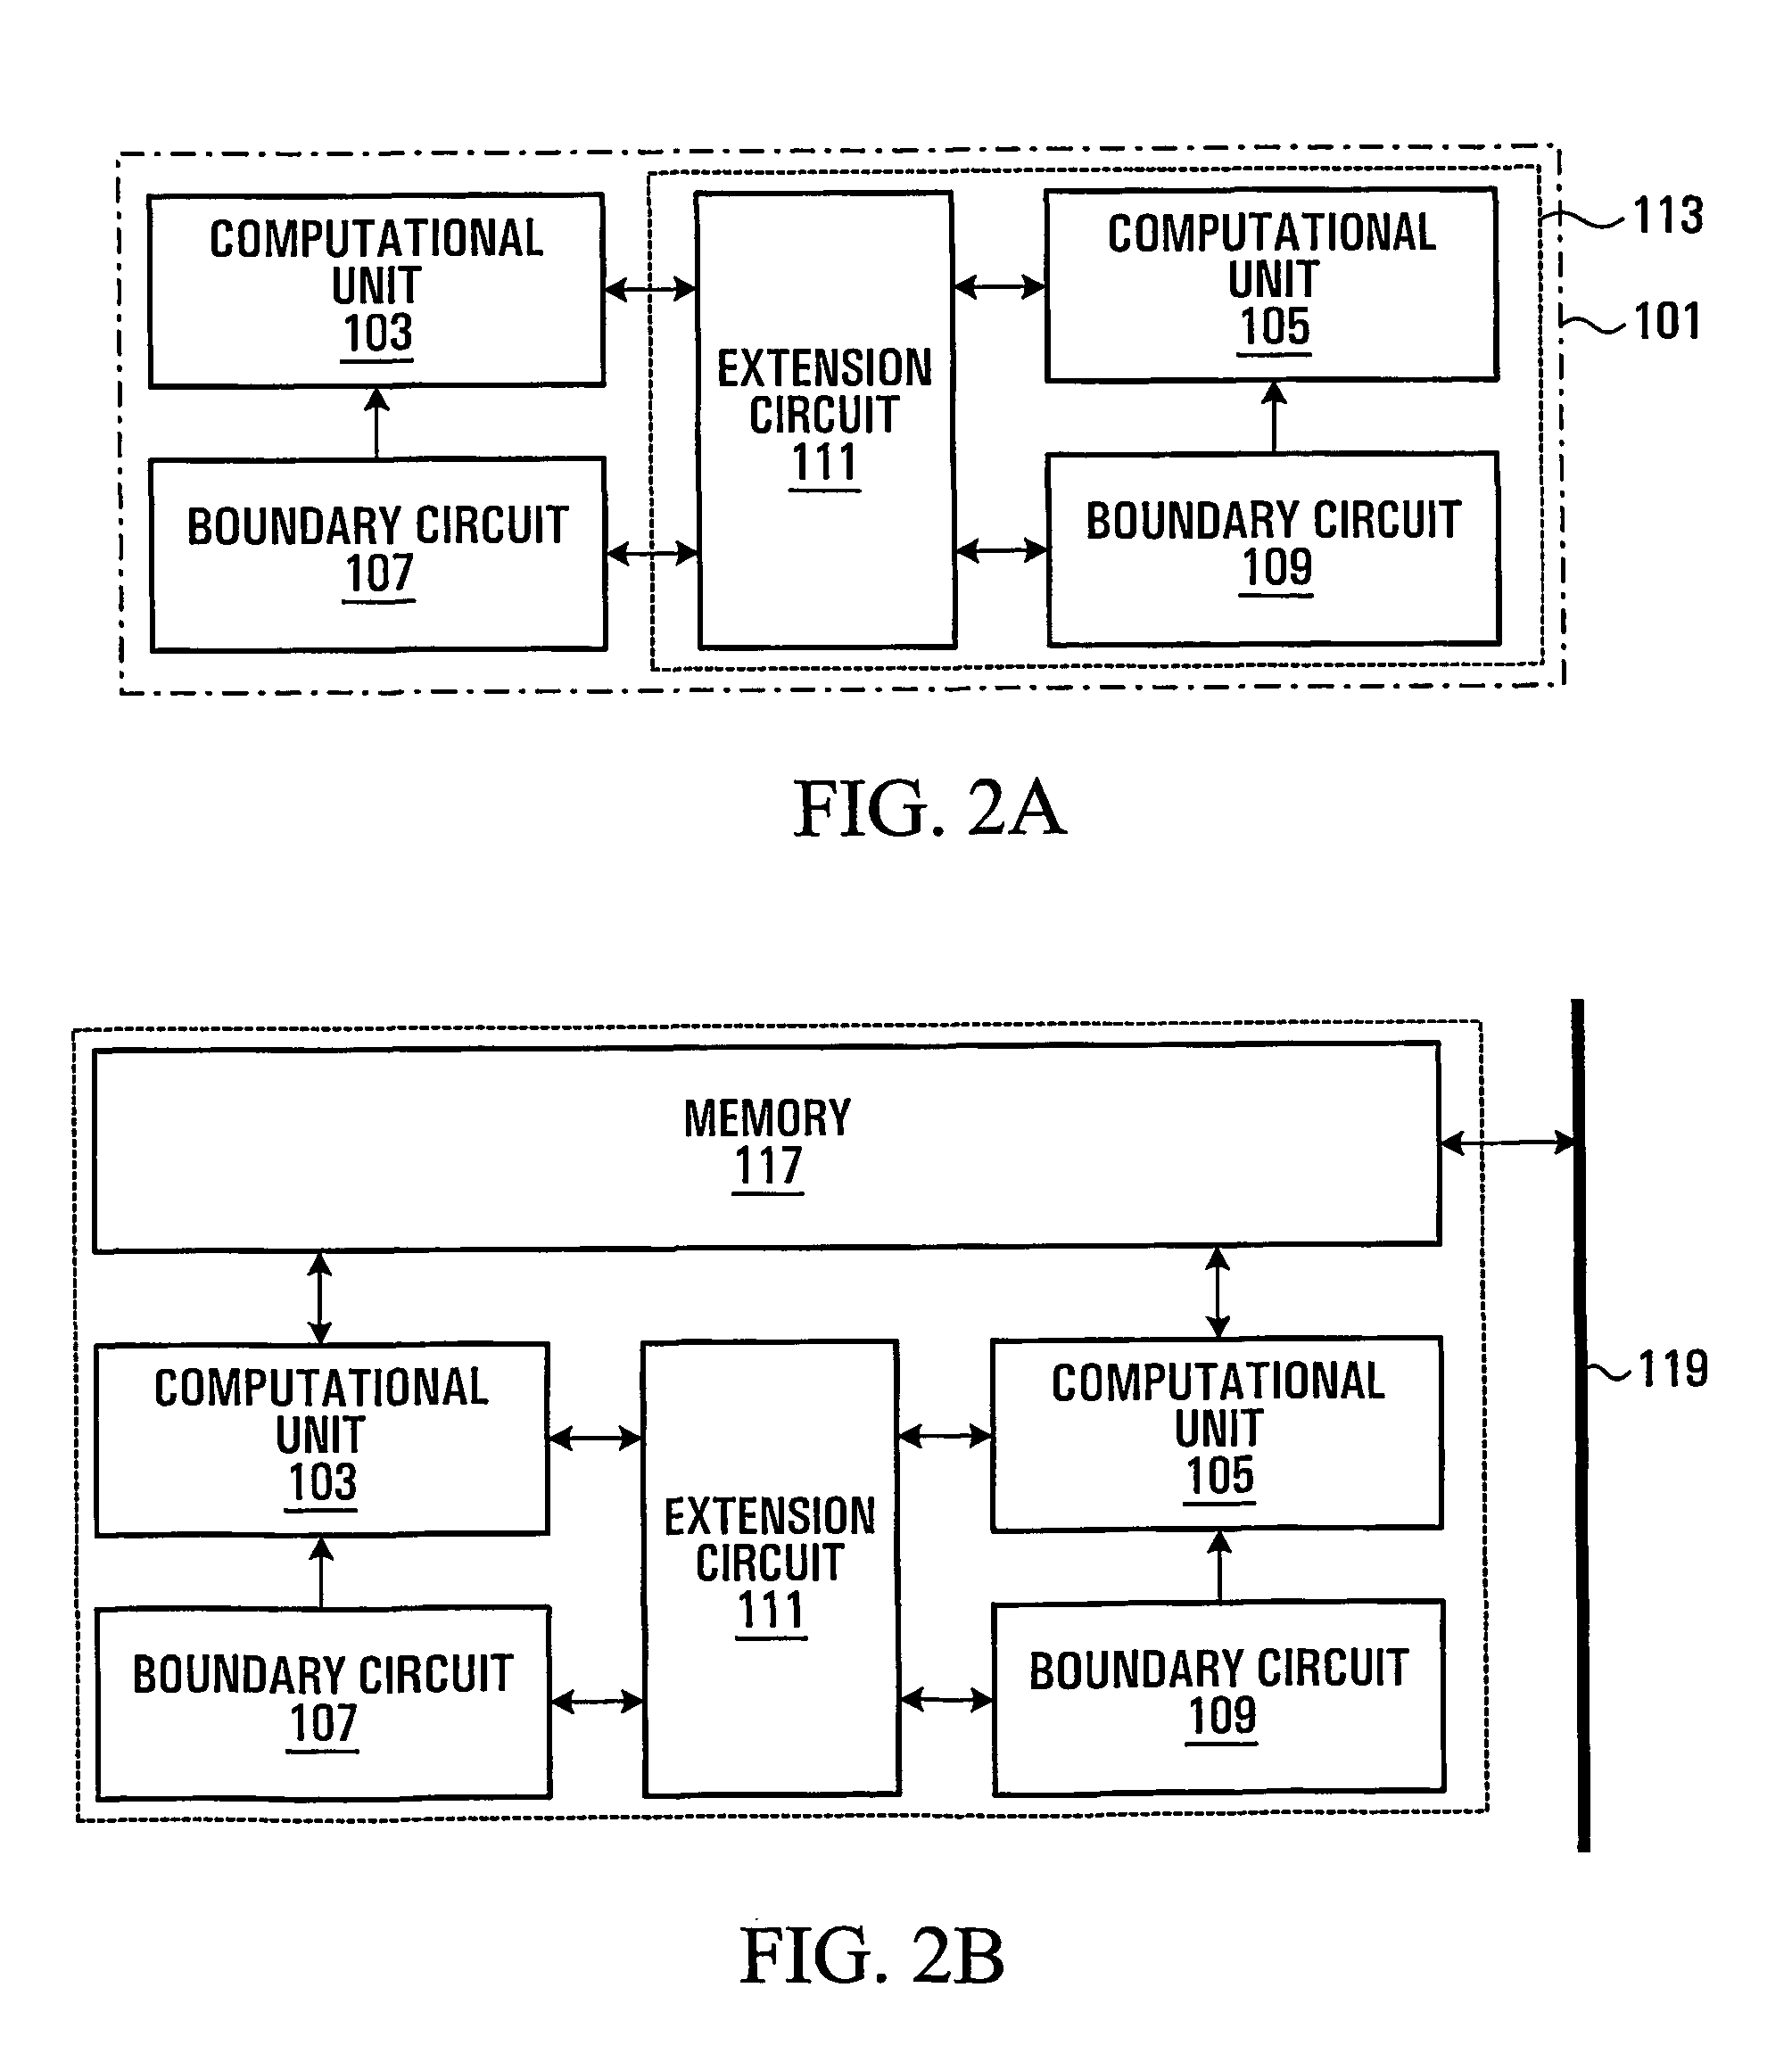 Apparatus for variable word length computing in an array processor